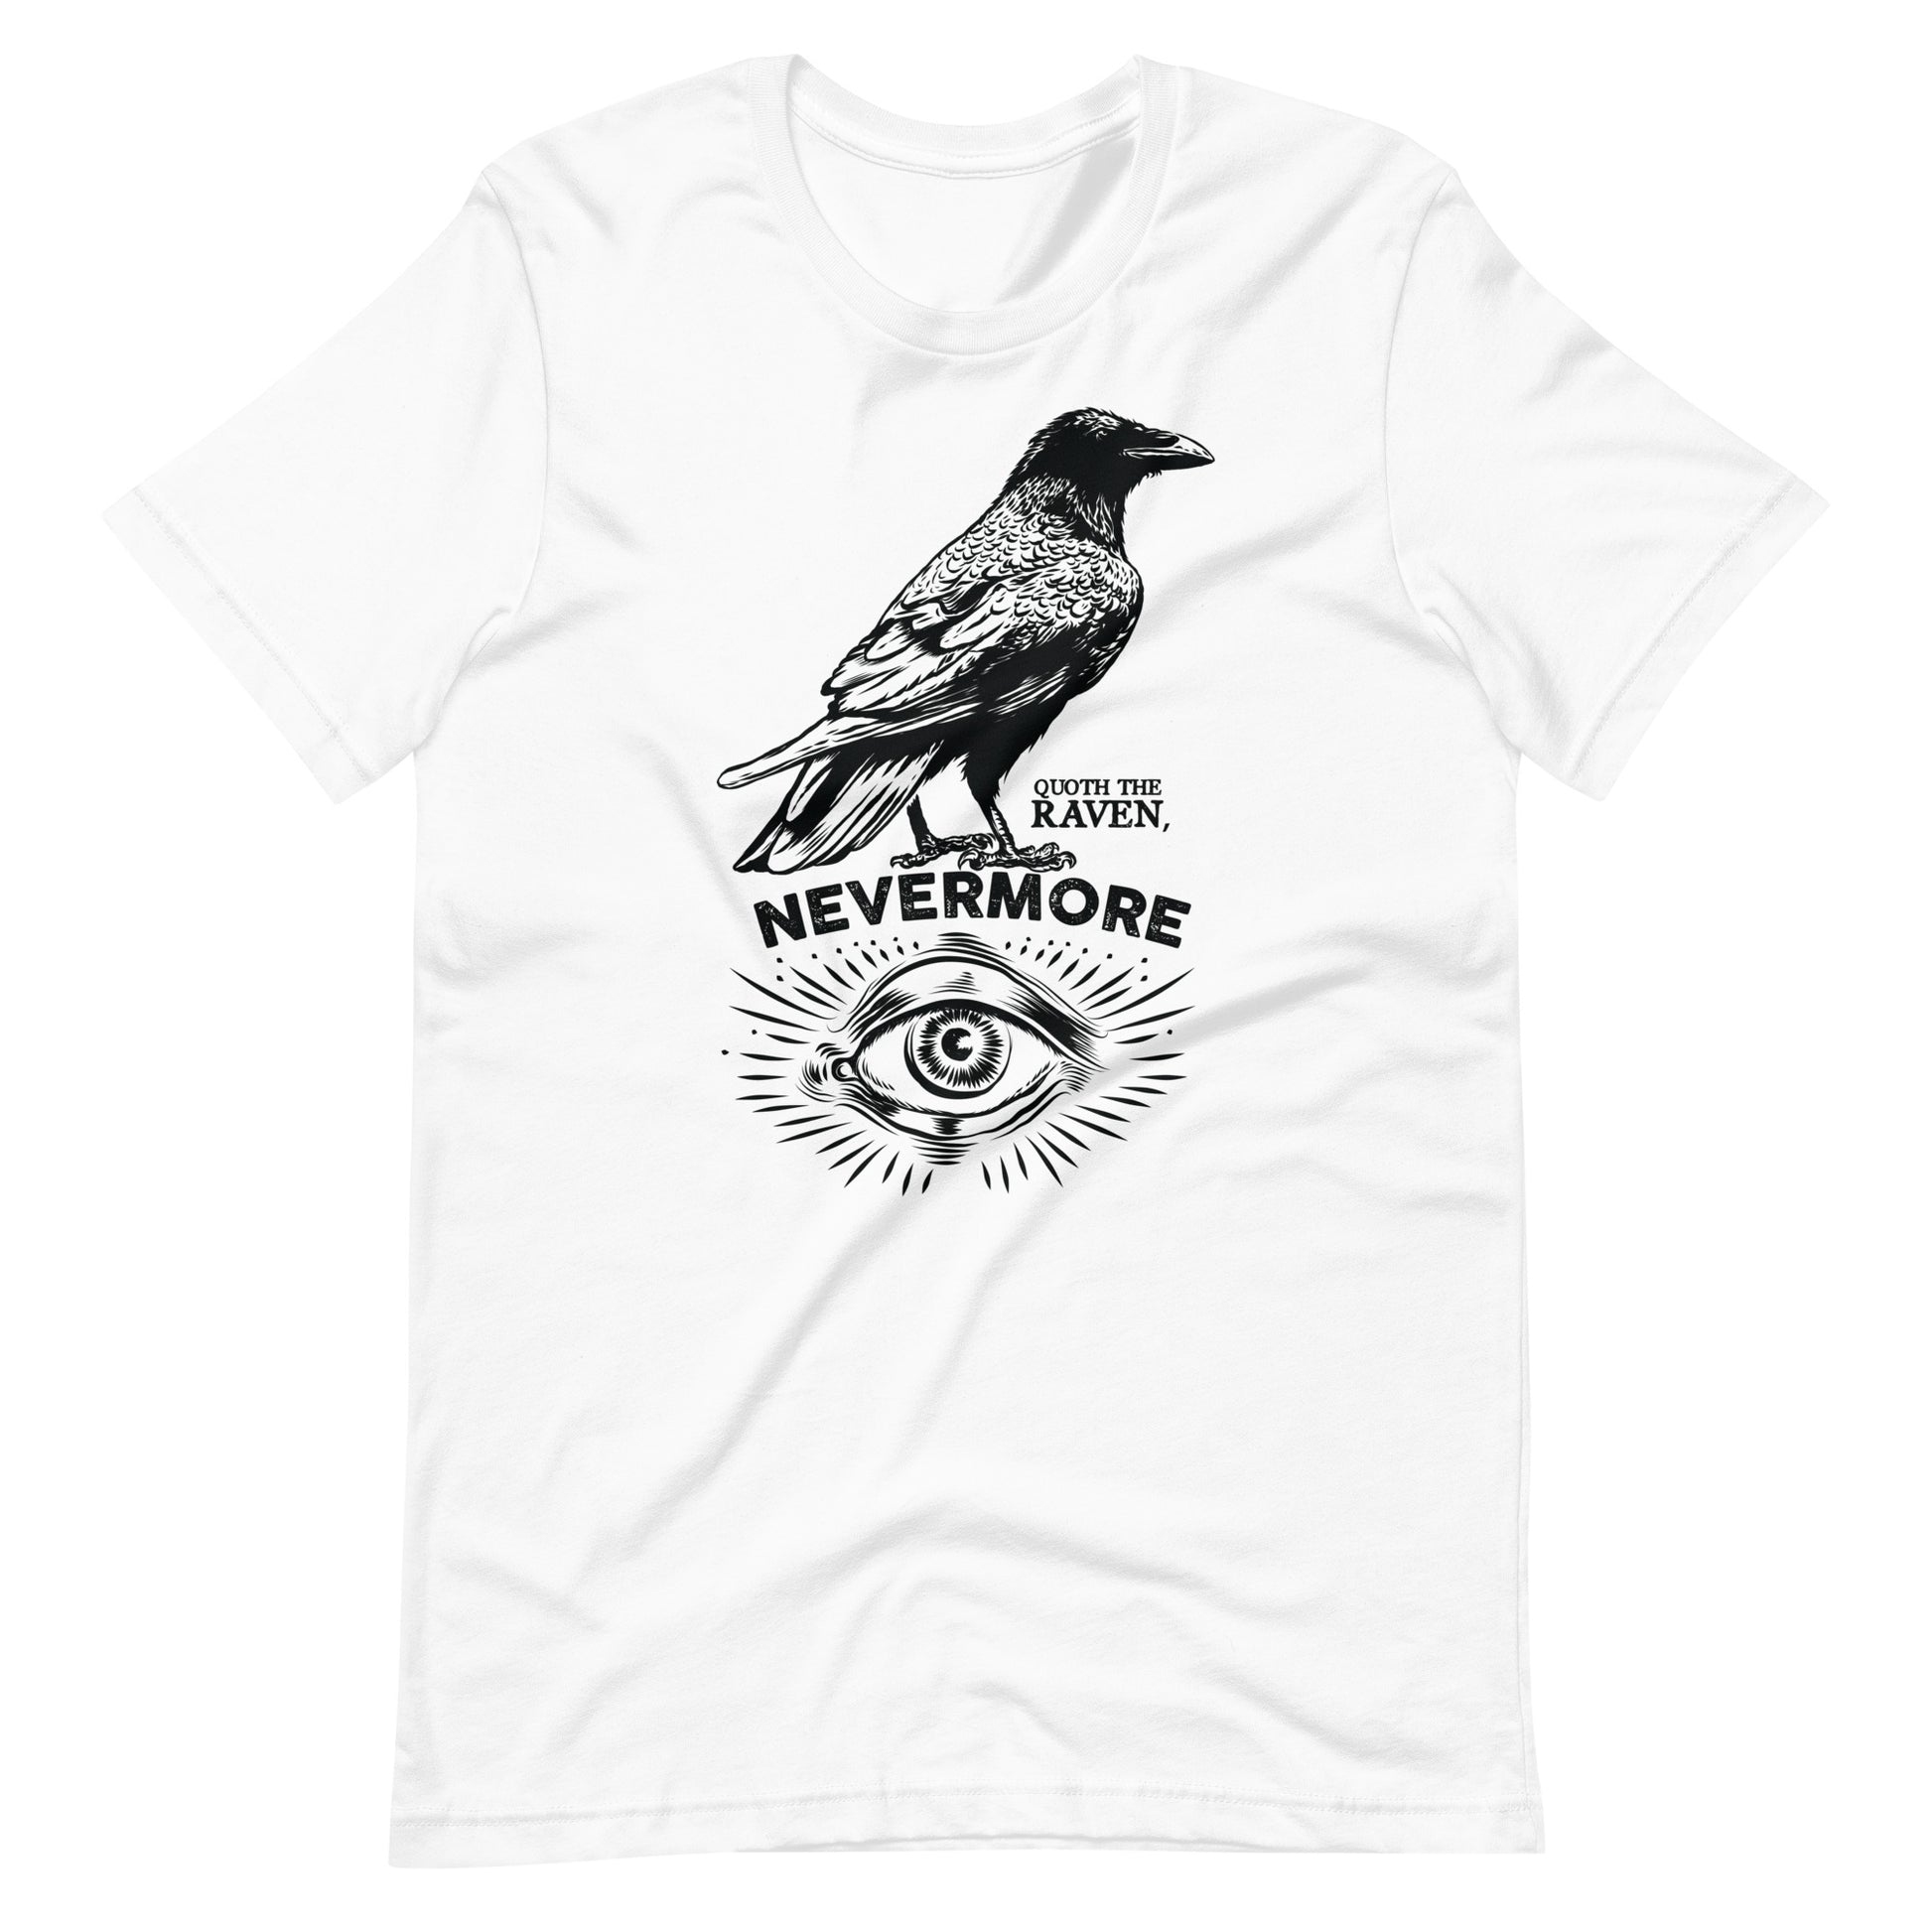 Quoth the Raven Nevermore - Men's t-shirt - White Front